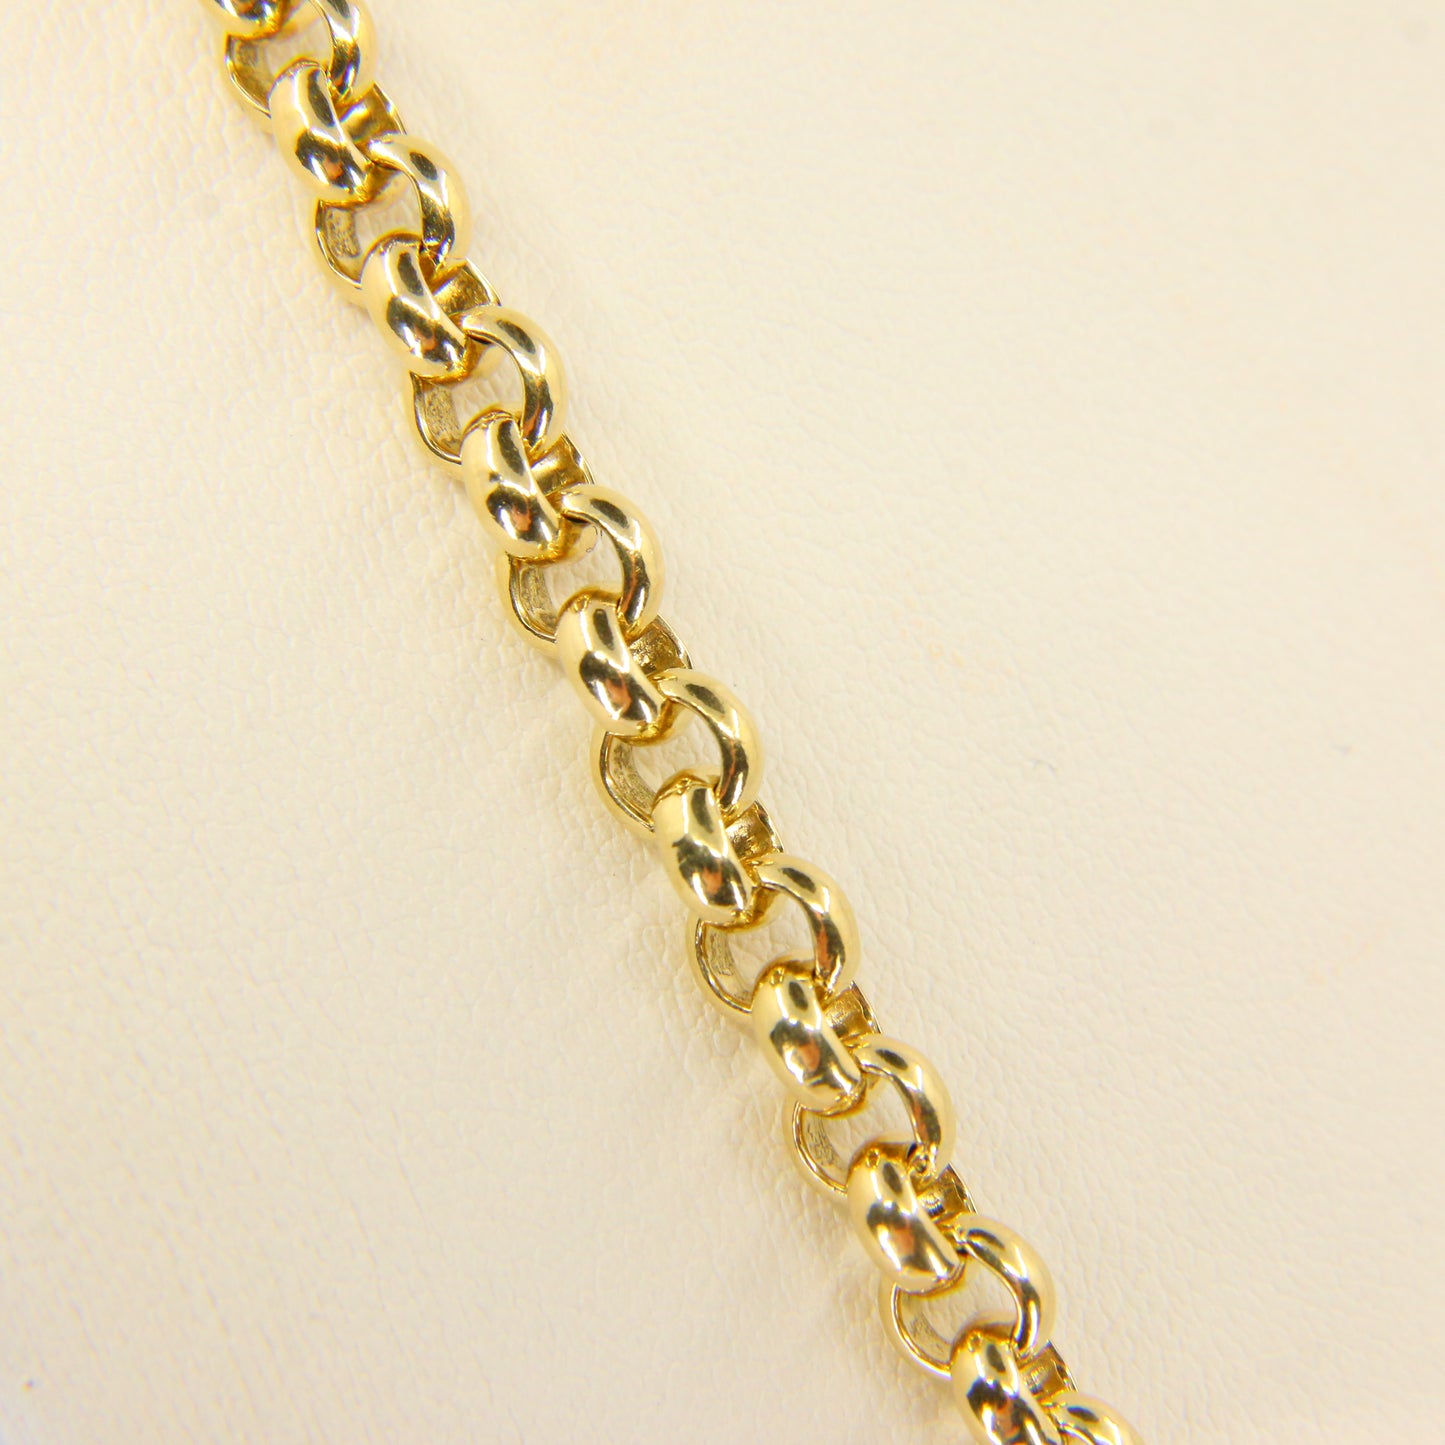 Vintage Hallmarked 9ct Gold Belcher Necklace Cable Link Chain Necklace Boxed